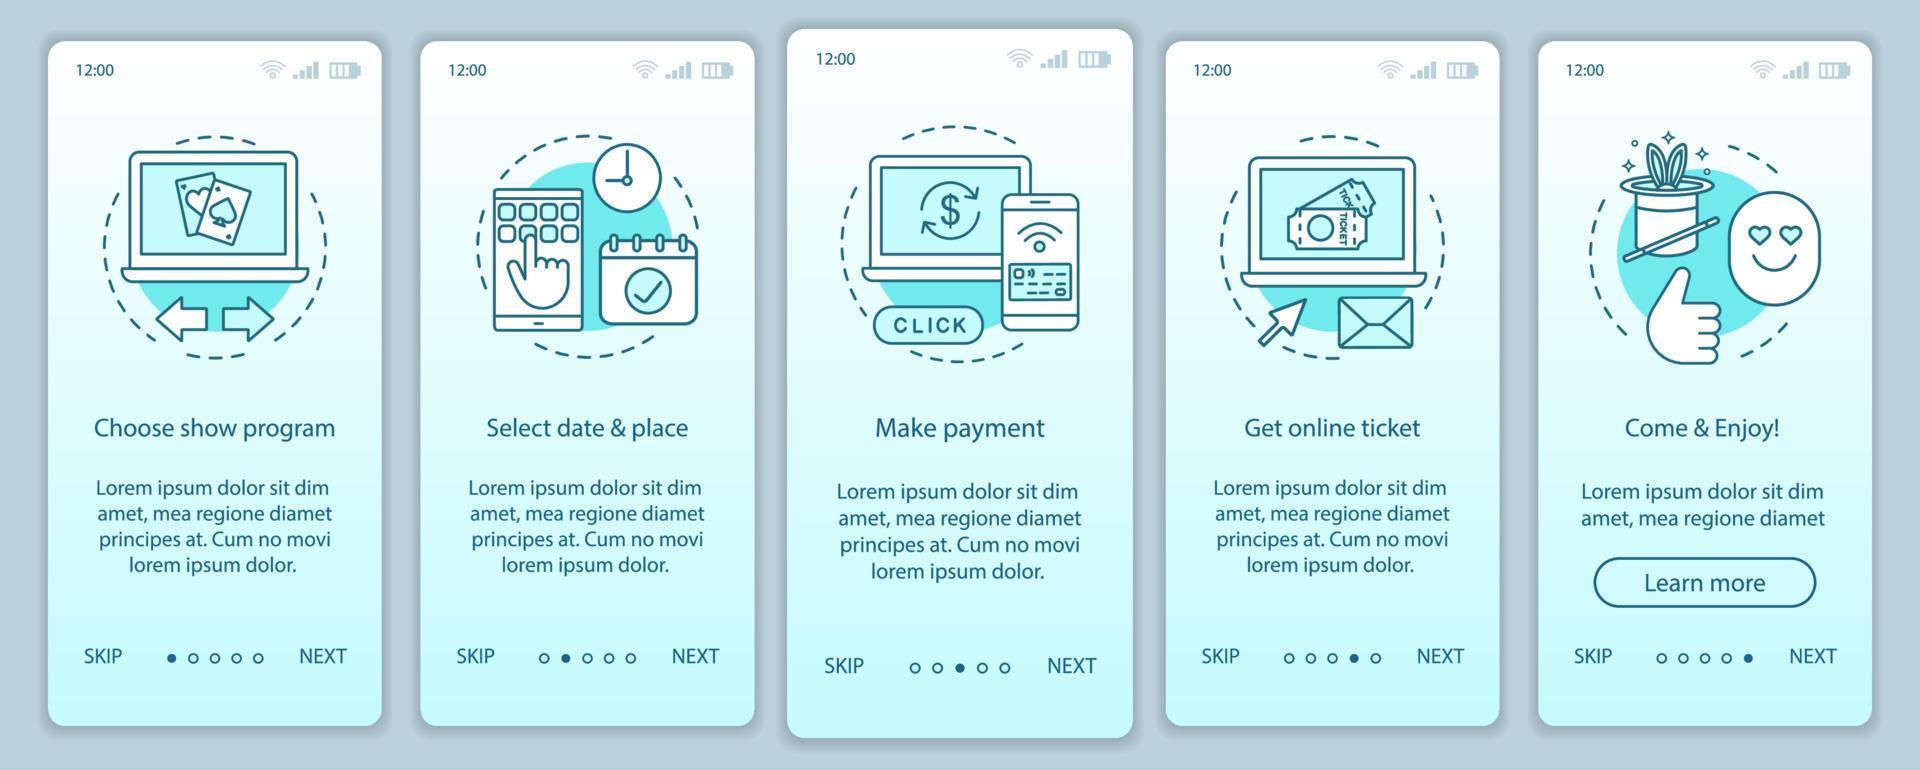 Show onboarding mobile app page screen vector template. Program online ticket payment. Performance event. Walkthrough website steps with linear illustrations. UX, UI, GUI smartphone interface concept